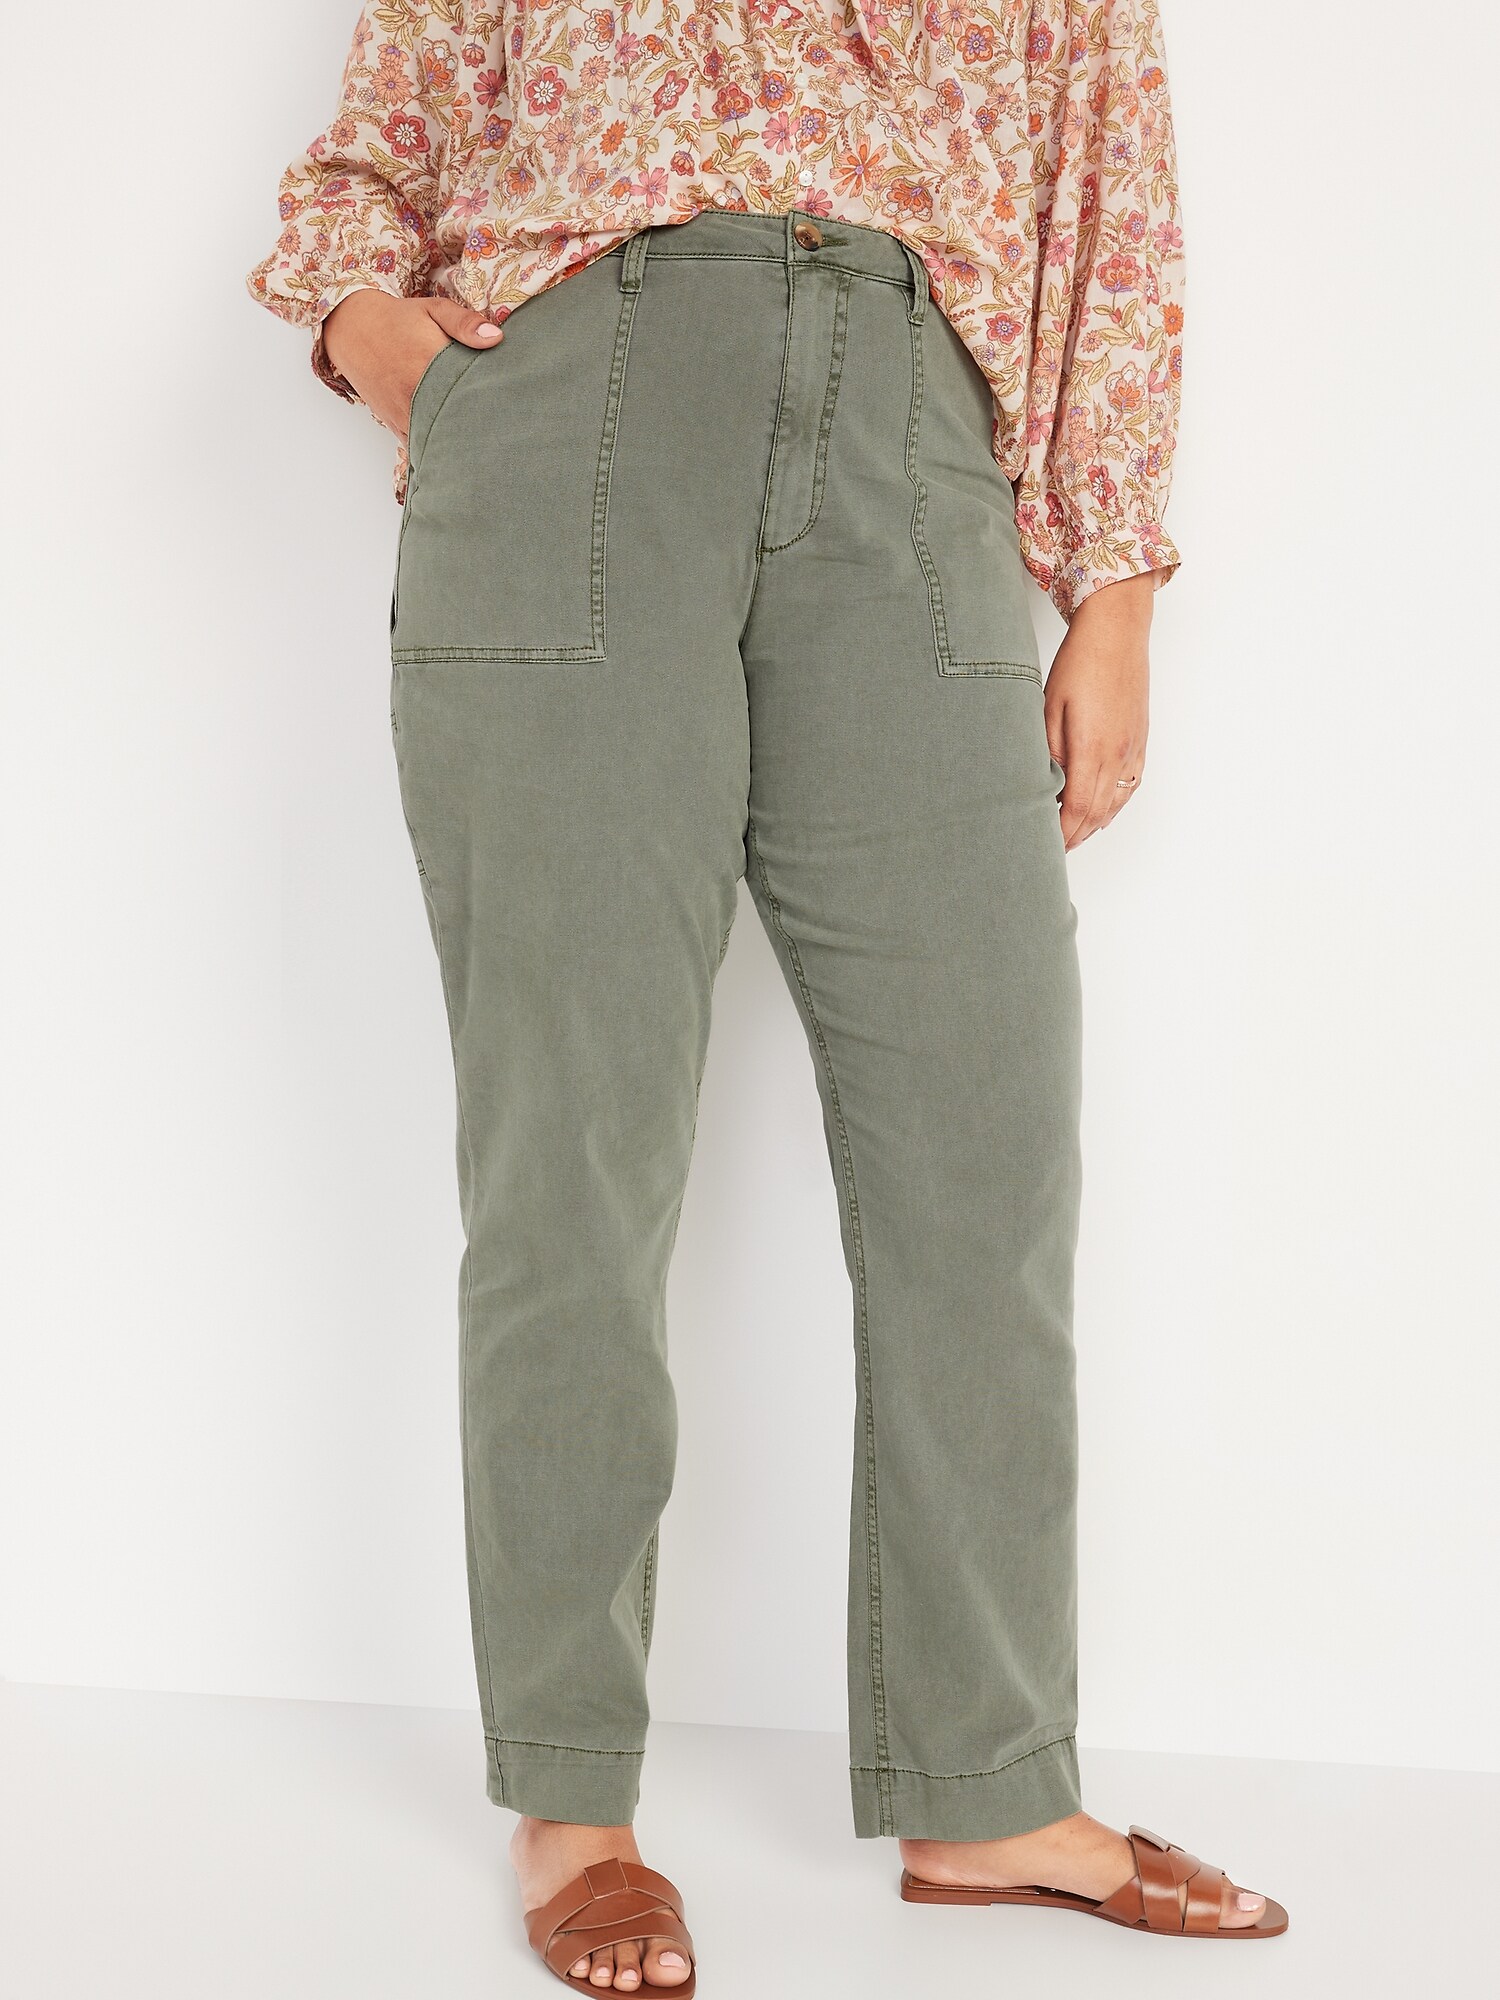 Old Navy Sisal High-Waisted Straight Canvas Workwear Pants Size 30